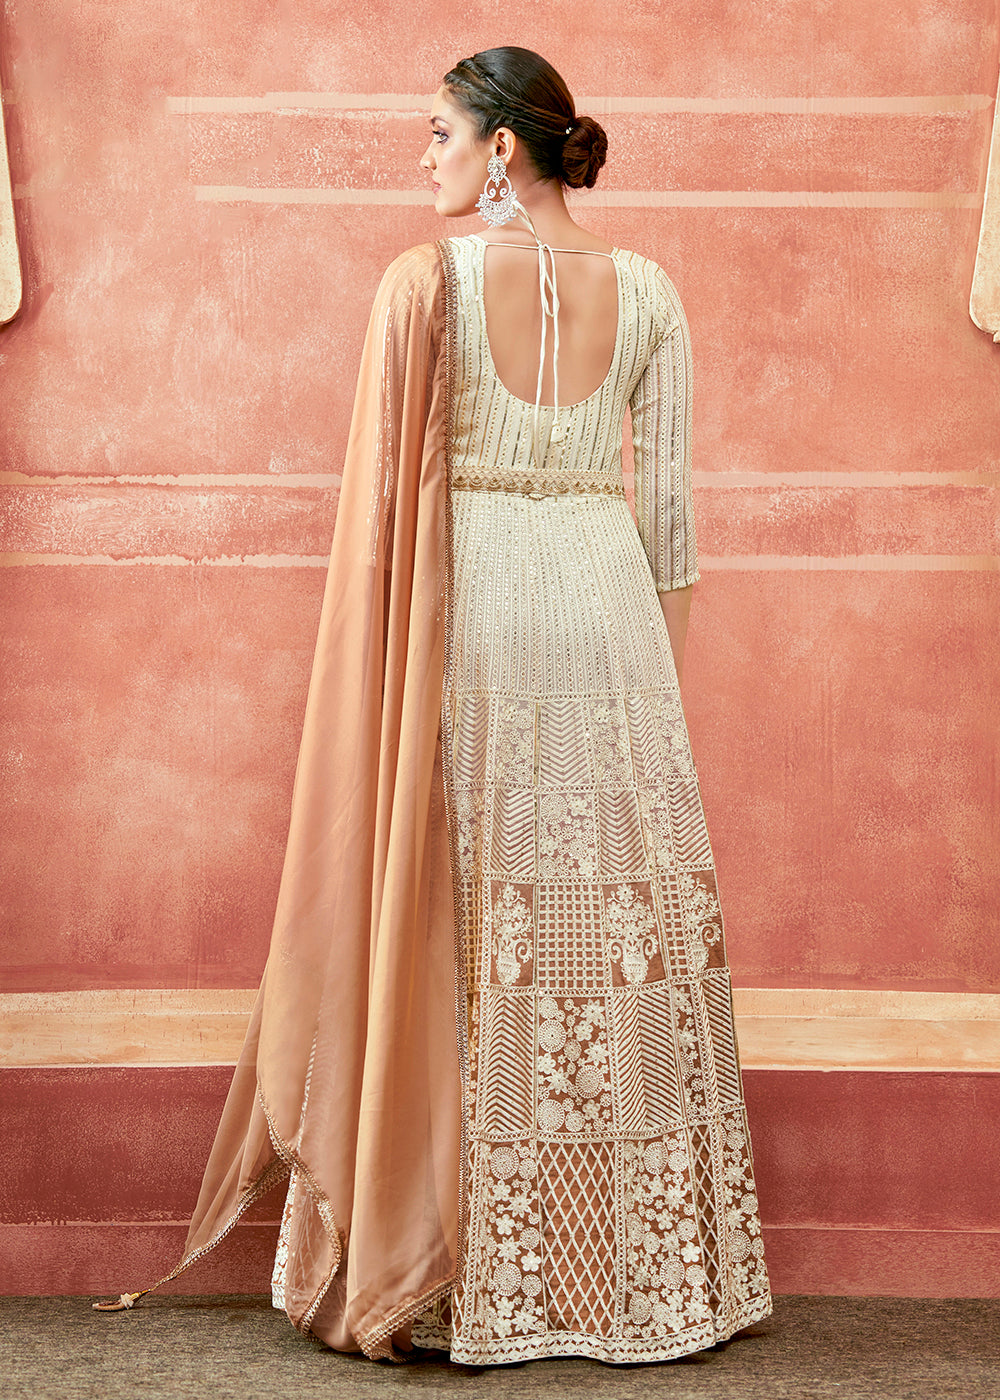 Buy Now Off White & Rust Georgette Embroidered Festive Anarkali Suit Online in USA, UK, Australia, New Zealand, Canada & Worldwide at Empress Clothing.